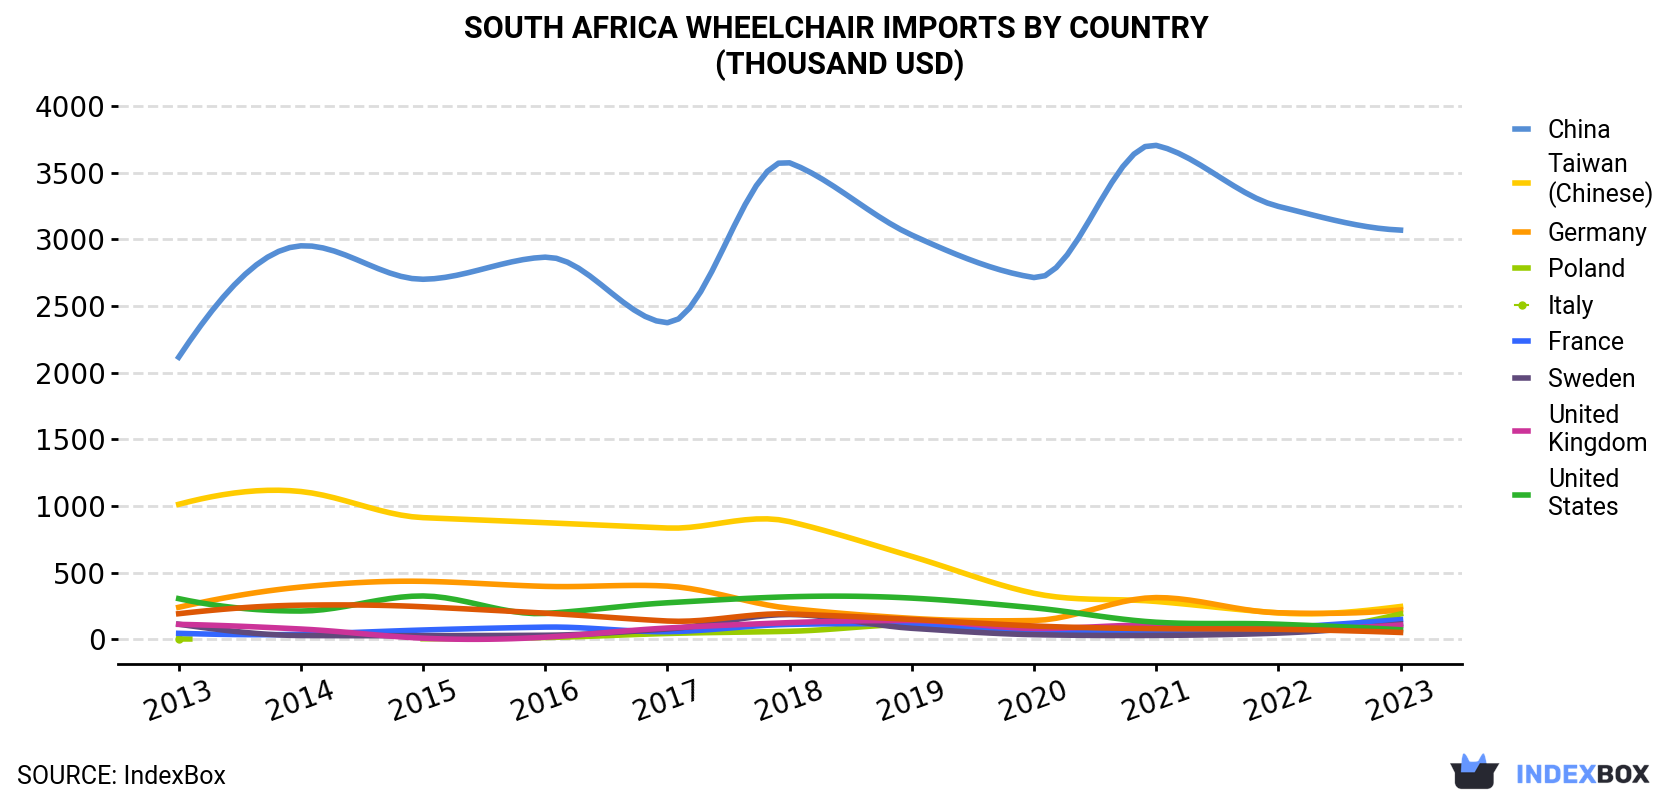 South Africa Wheelchair Imports By Country (Thousand USD)